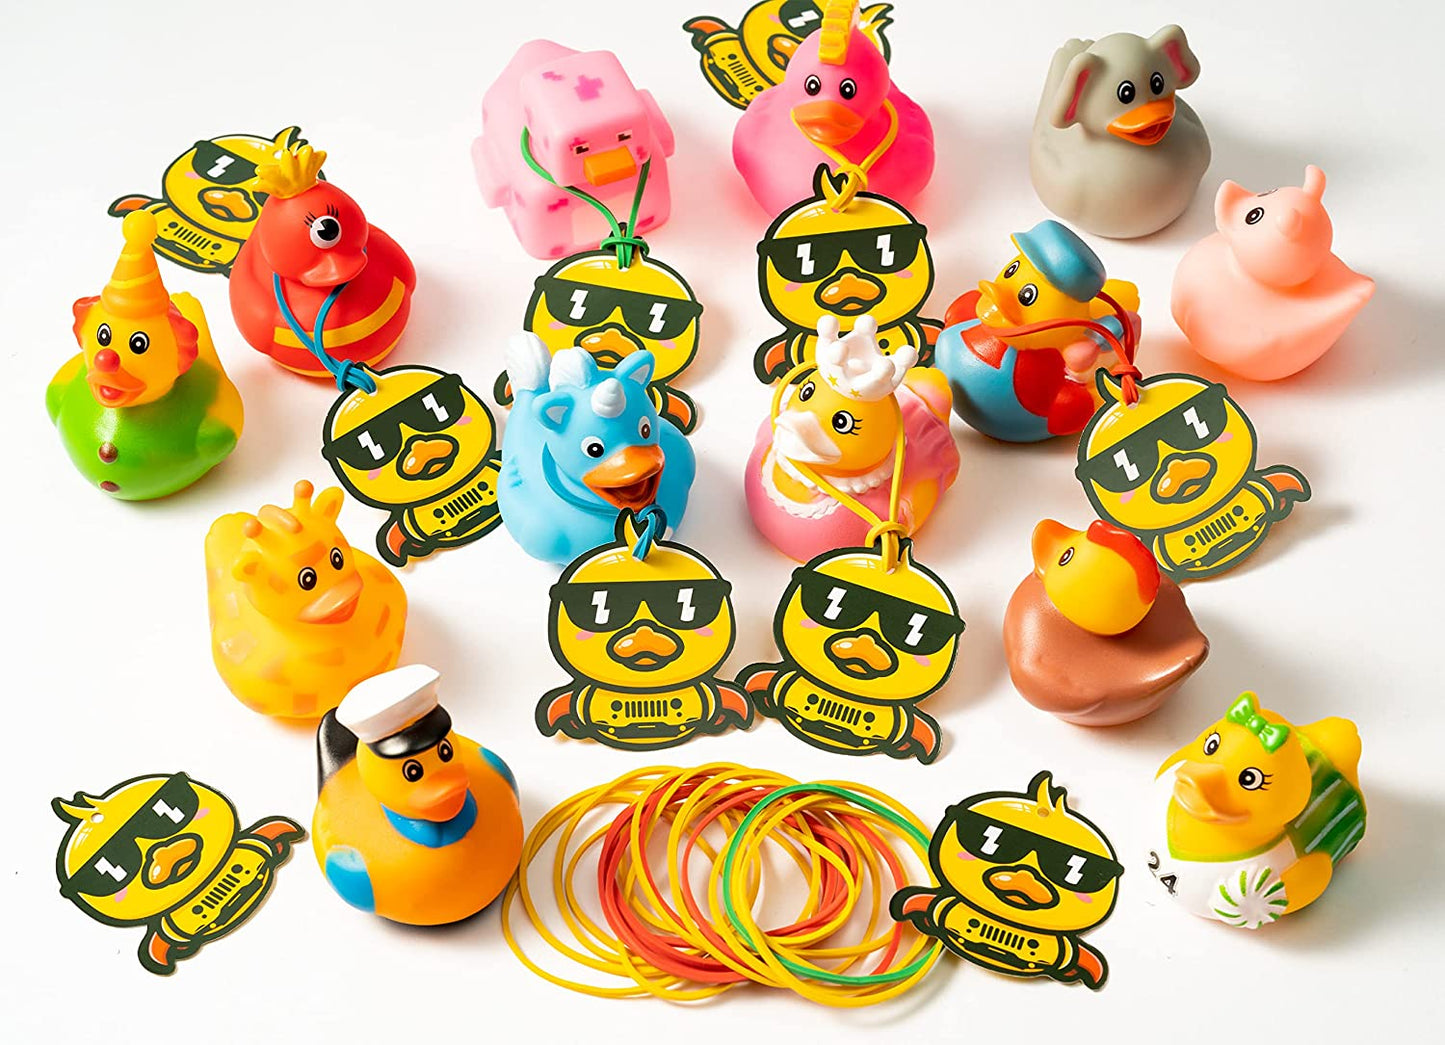 BkeeCten 24Set You've Been Ducked Card with Rubber Ducks and Strings Duck Duck Tags for Hiding Rubber Ducky Design Ducking Game Card with Hole Rubber Band for Car Street Toy Party Game Decor Favors